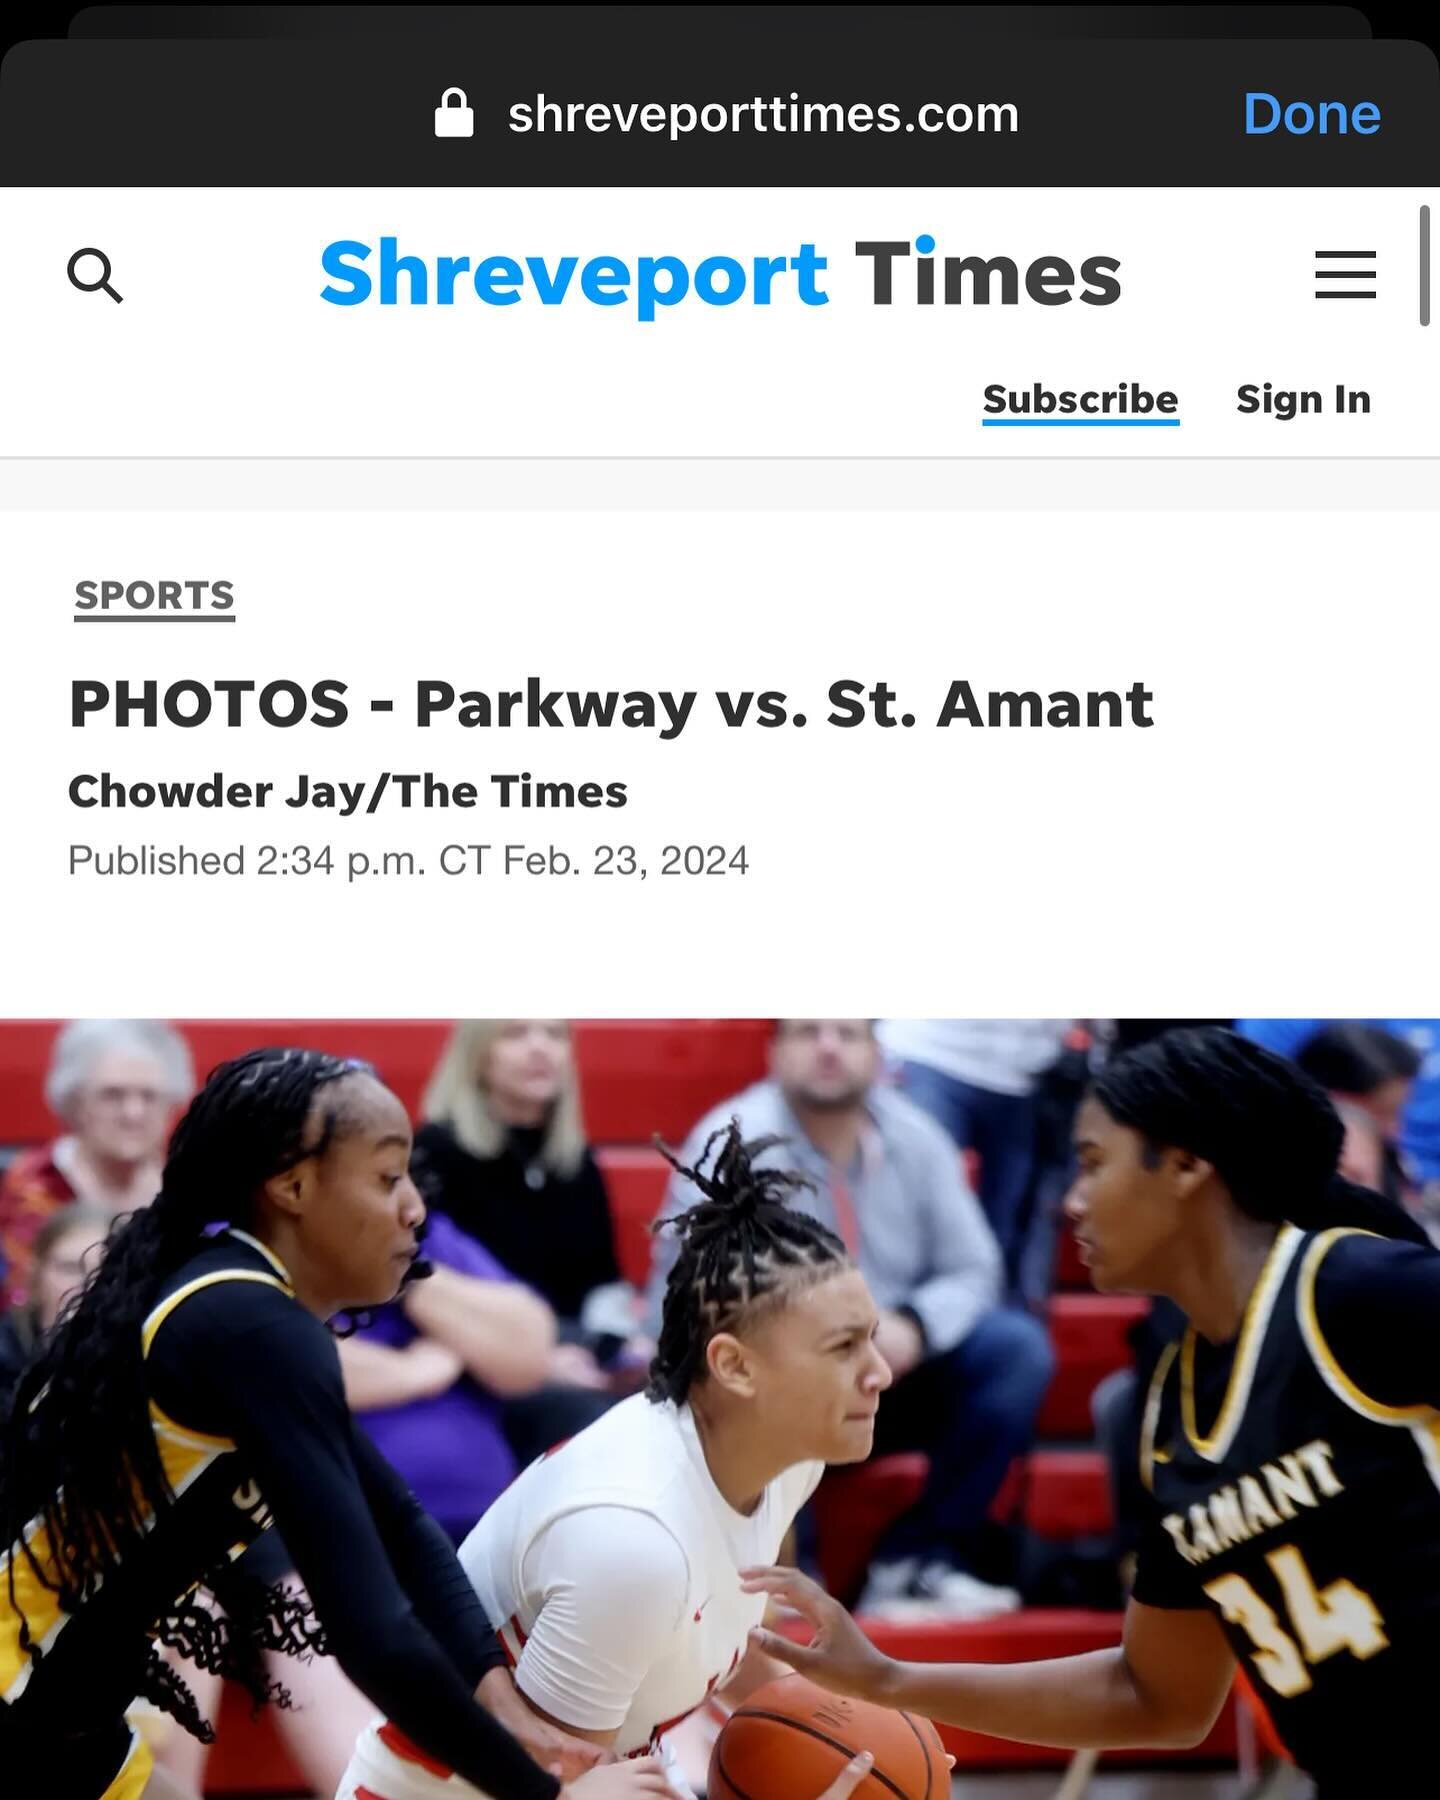 Looks like some pictures I took at the Parkway vs St. Amant basketball game got published in an article by @shreveporttimes 🙂